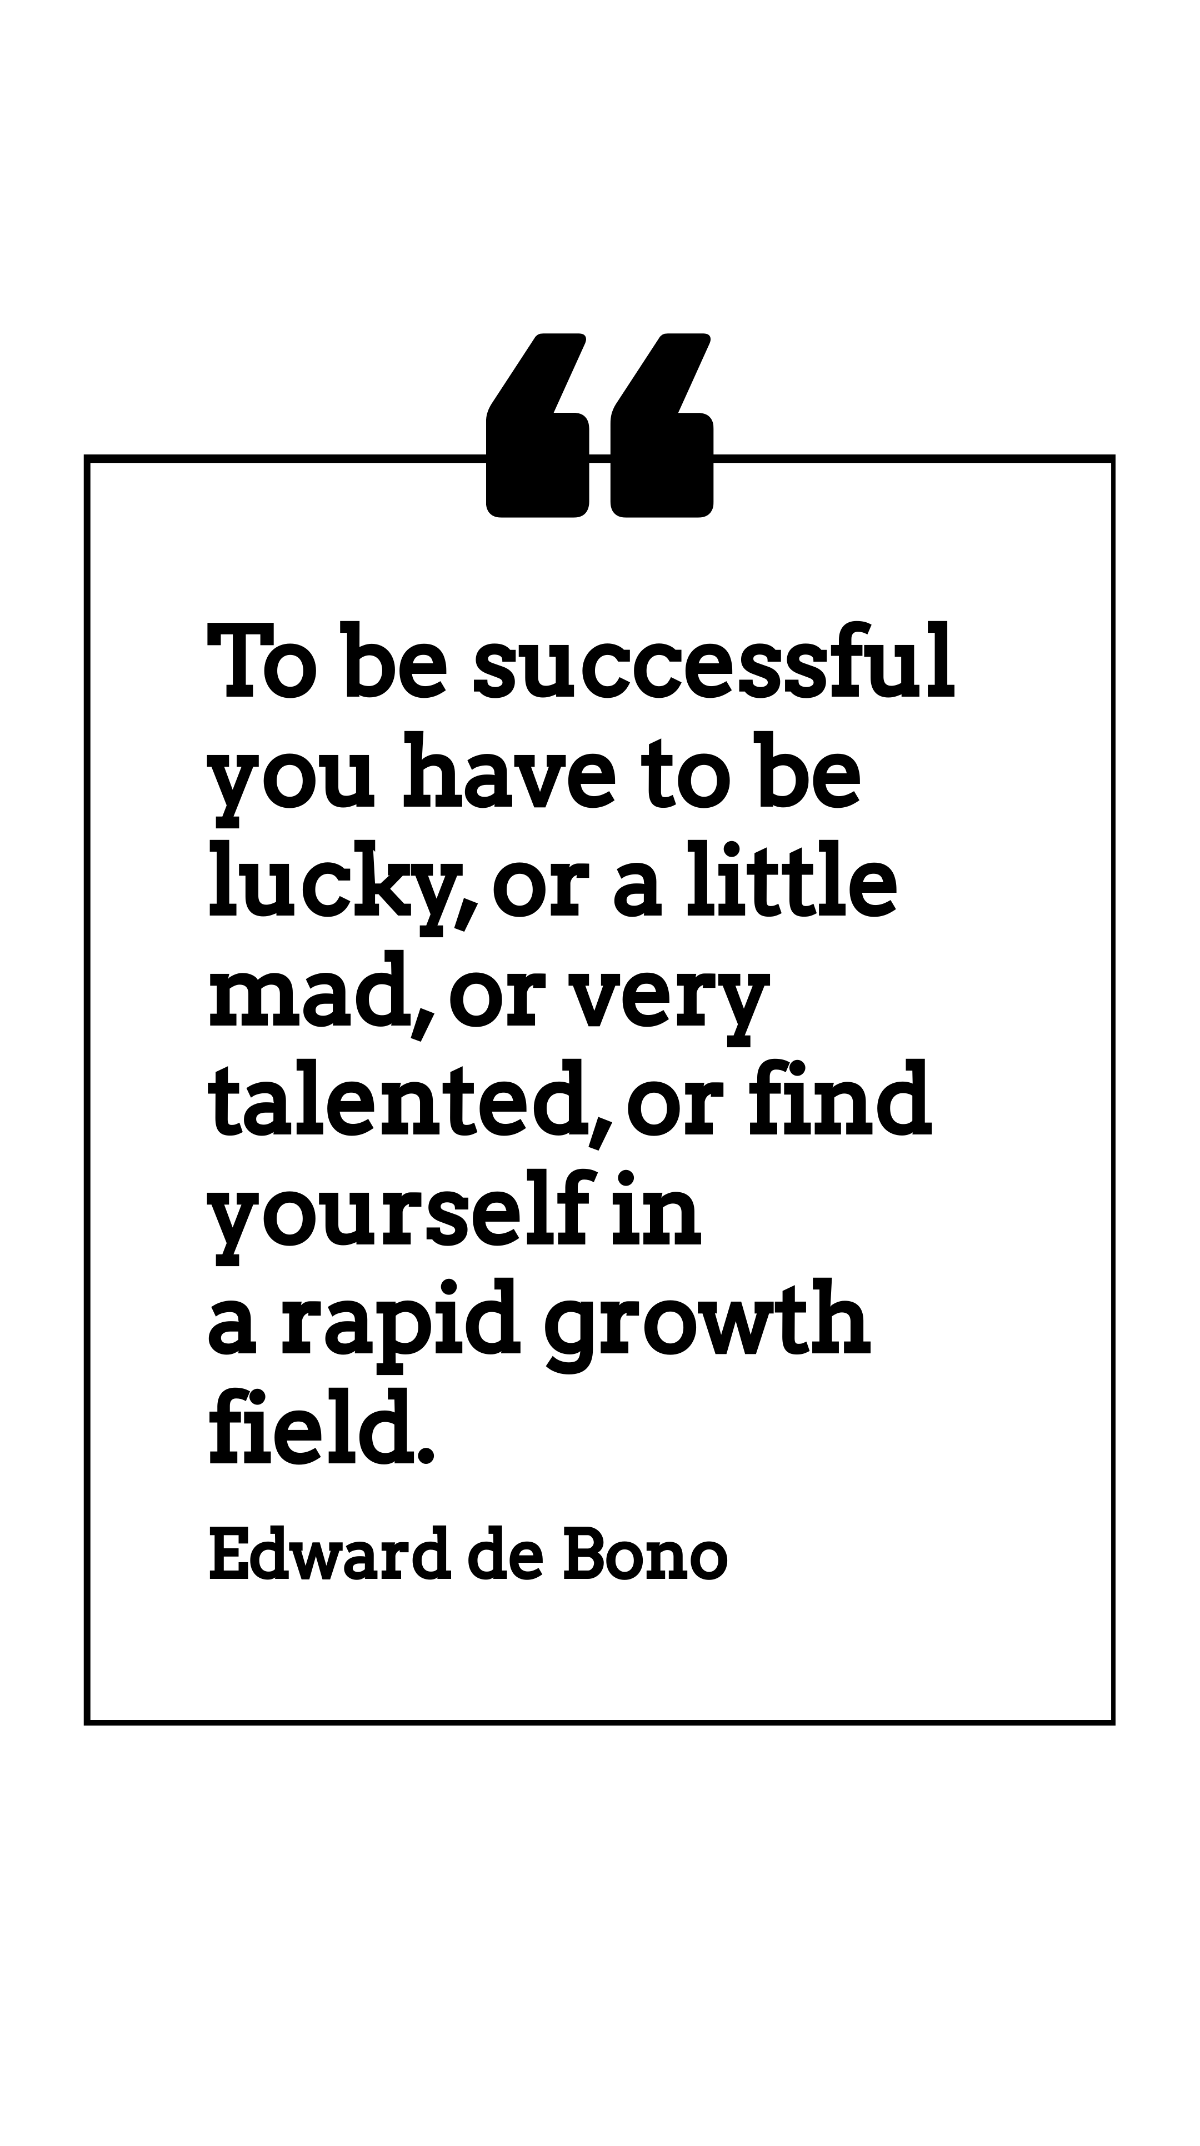 Free Edward de Bono - To be successful you have to be lucky, or a little mad, or very talented, or find yourself in a rapid growth field. Template